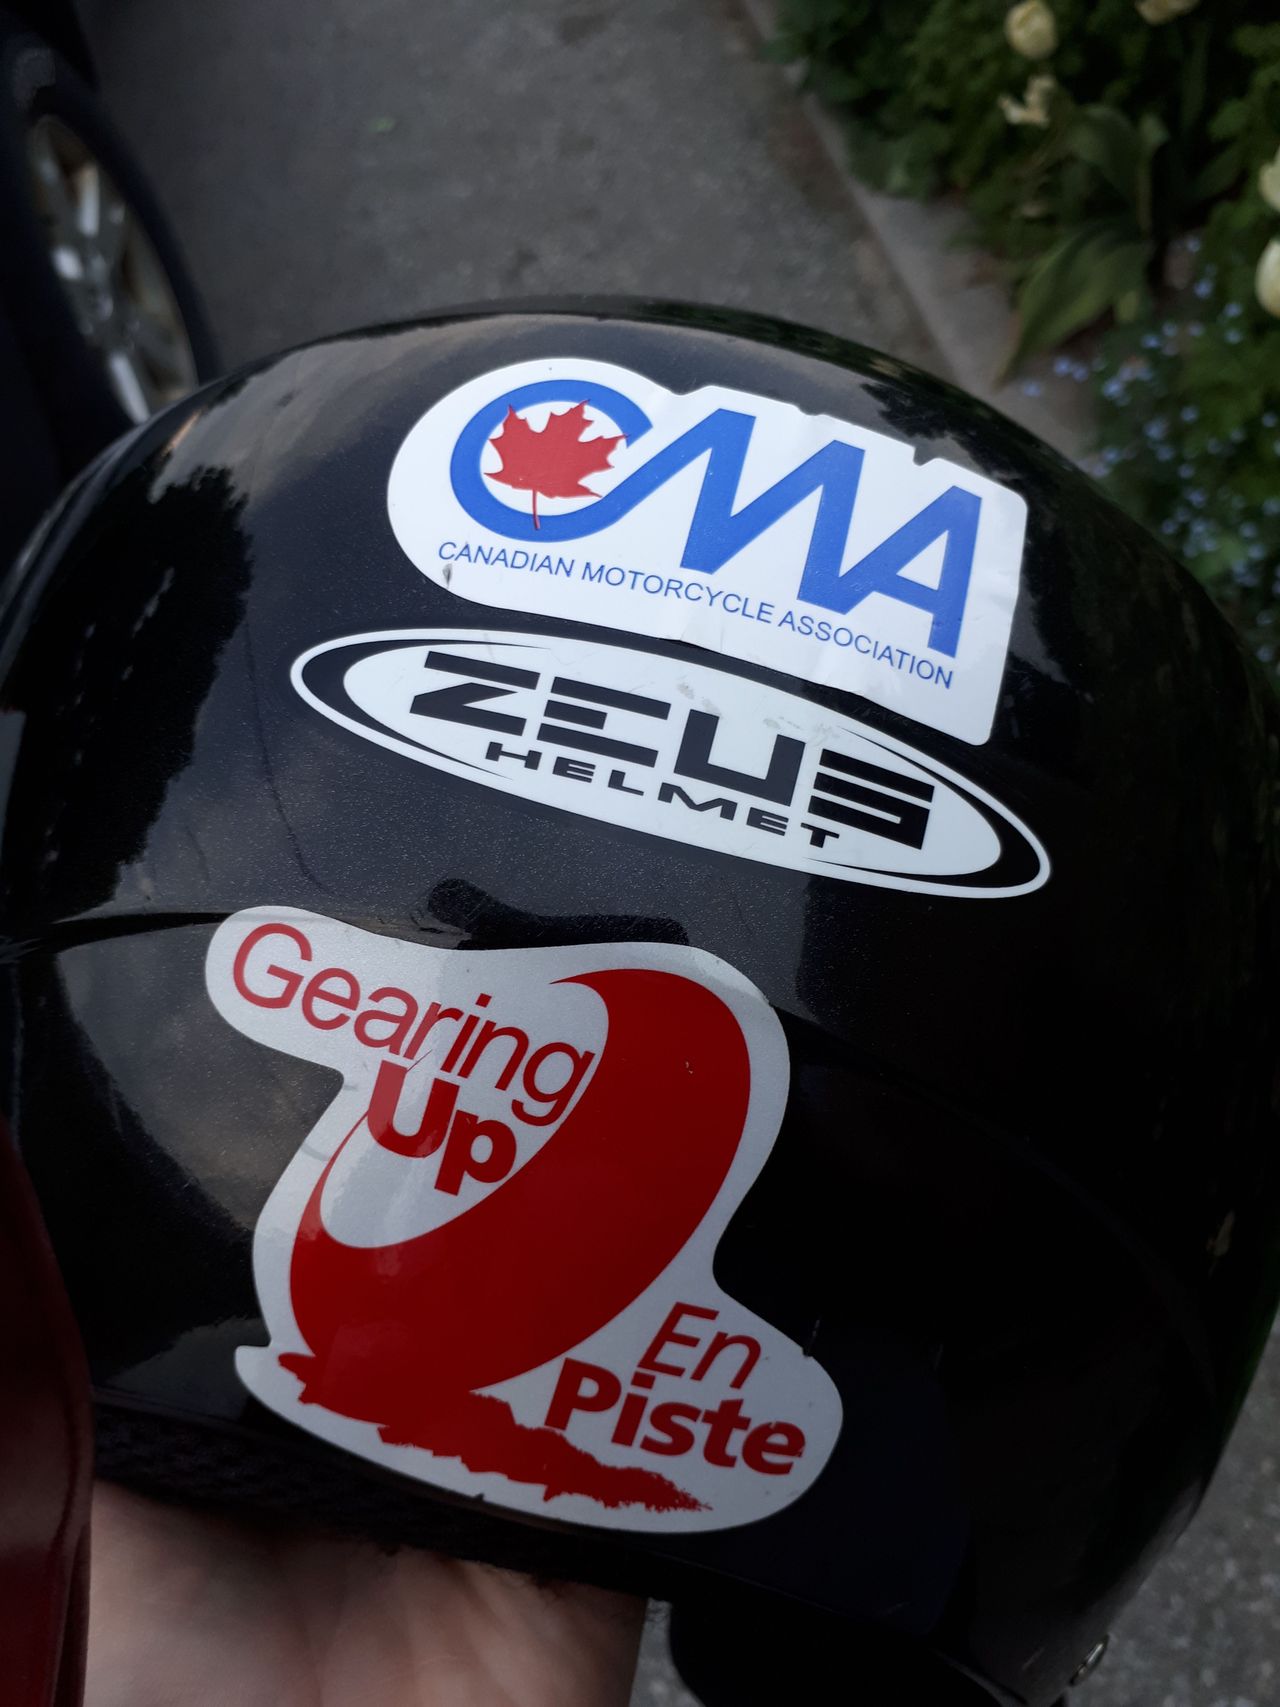 Gearing Up, M2X, Canadian Motorcycle Association 